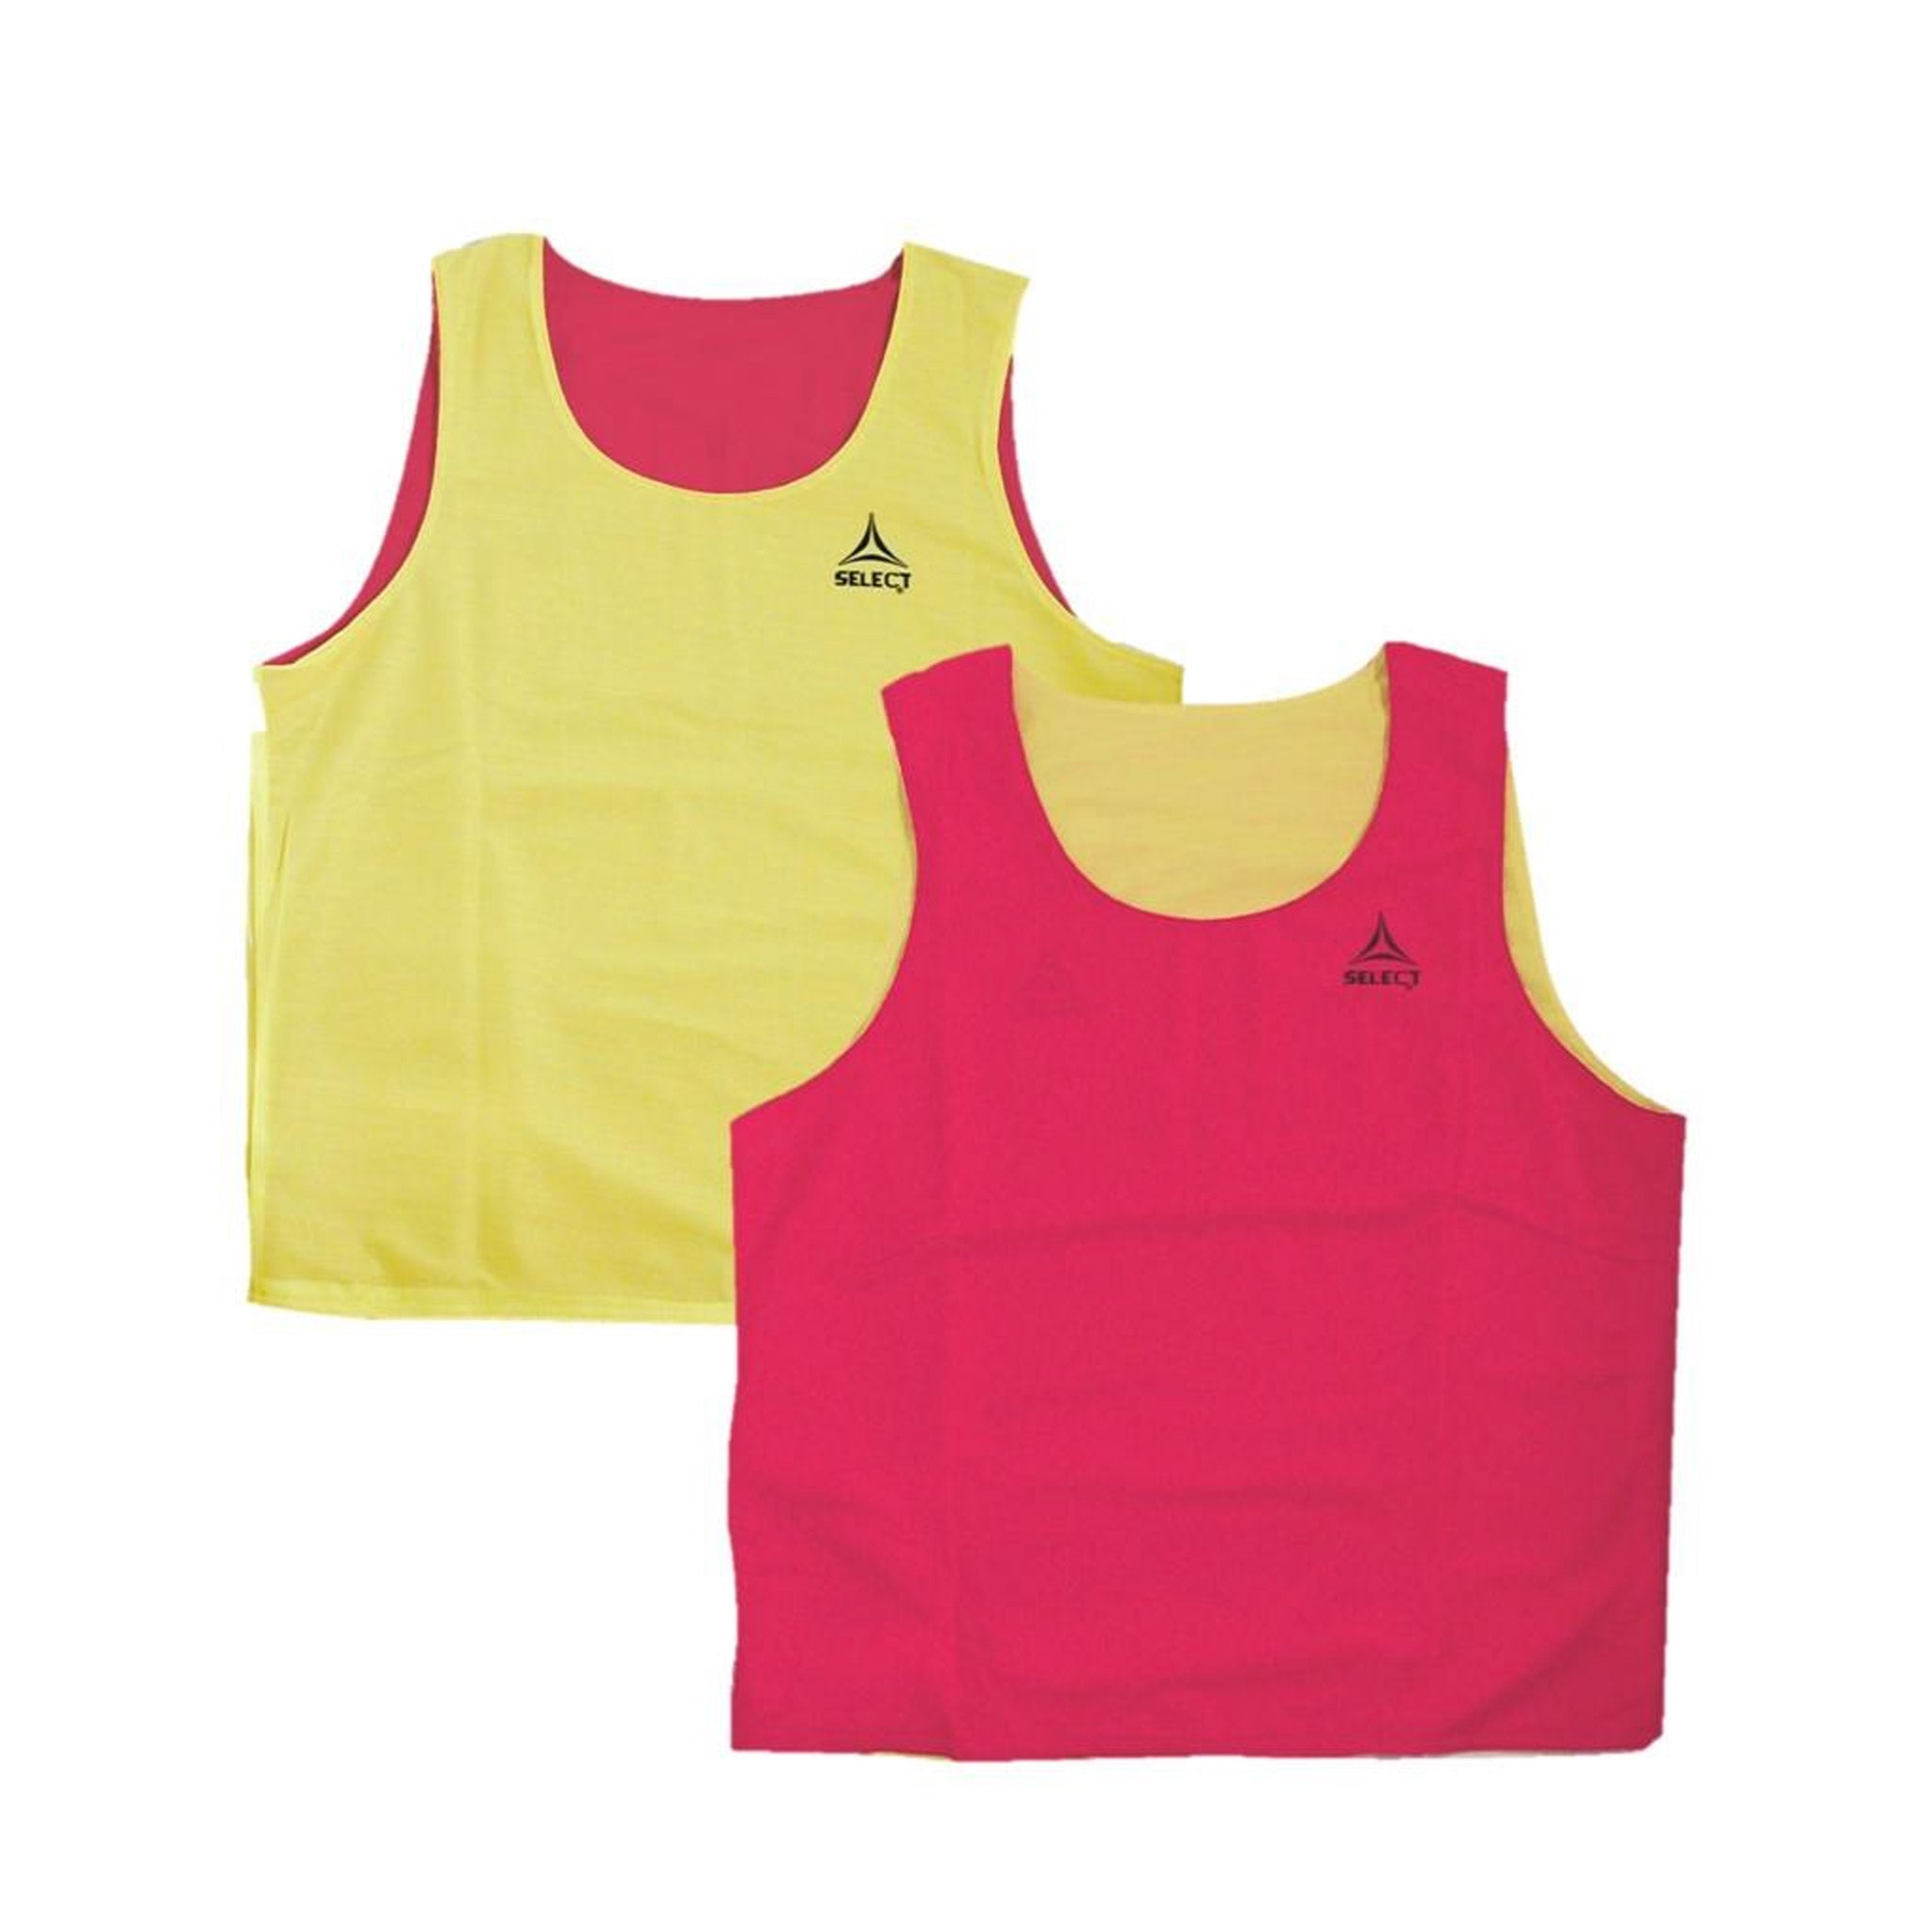 Reversible training bib in yellow and red #color_red/yellow